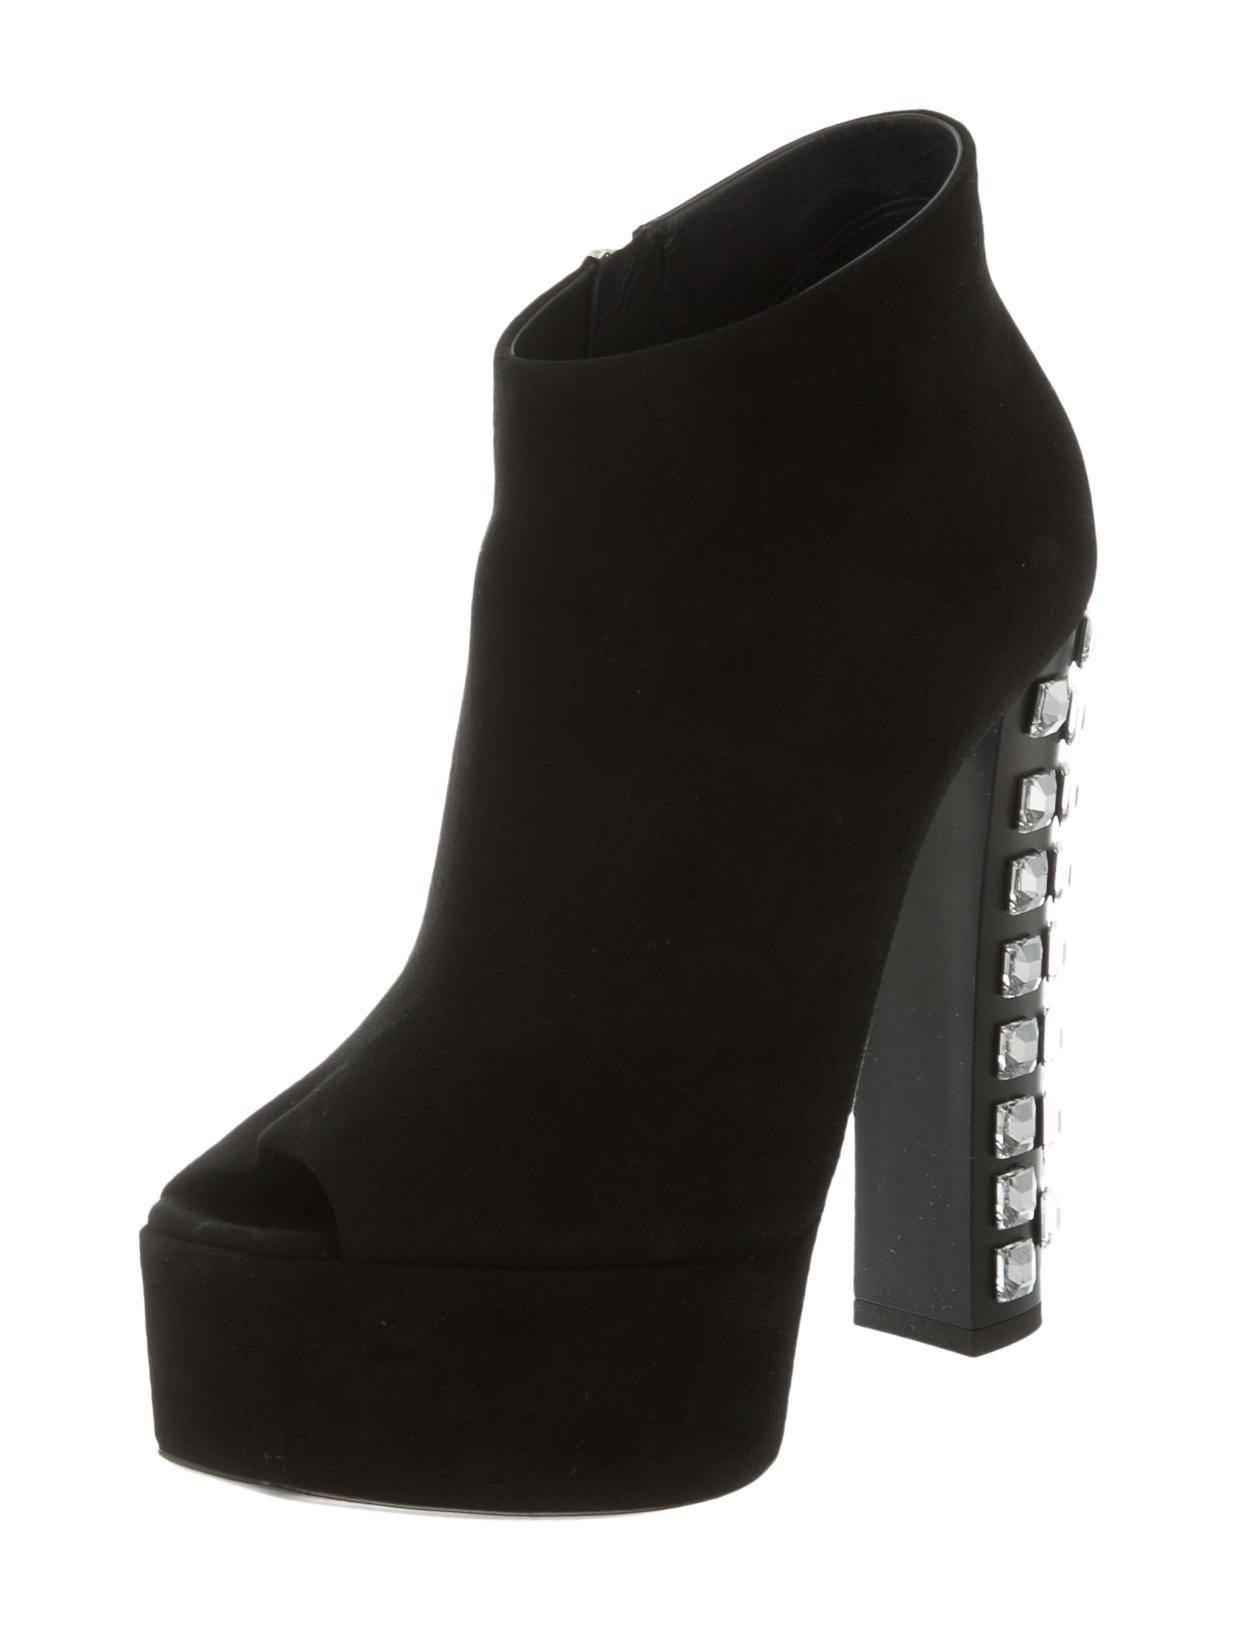 CURATOR'S NOTES

Giuseppe Zanotti NEW & SOLD OUT Black Suede Embellished Ankle Booties in Box  

Size IT 37
Suede
Jewel detail
Resin heels 
Zipper closure
Made in Italy
Heel height 5.75"
Includes original Giuseppe Zanotti dust bag and box